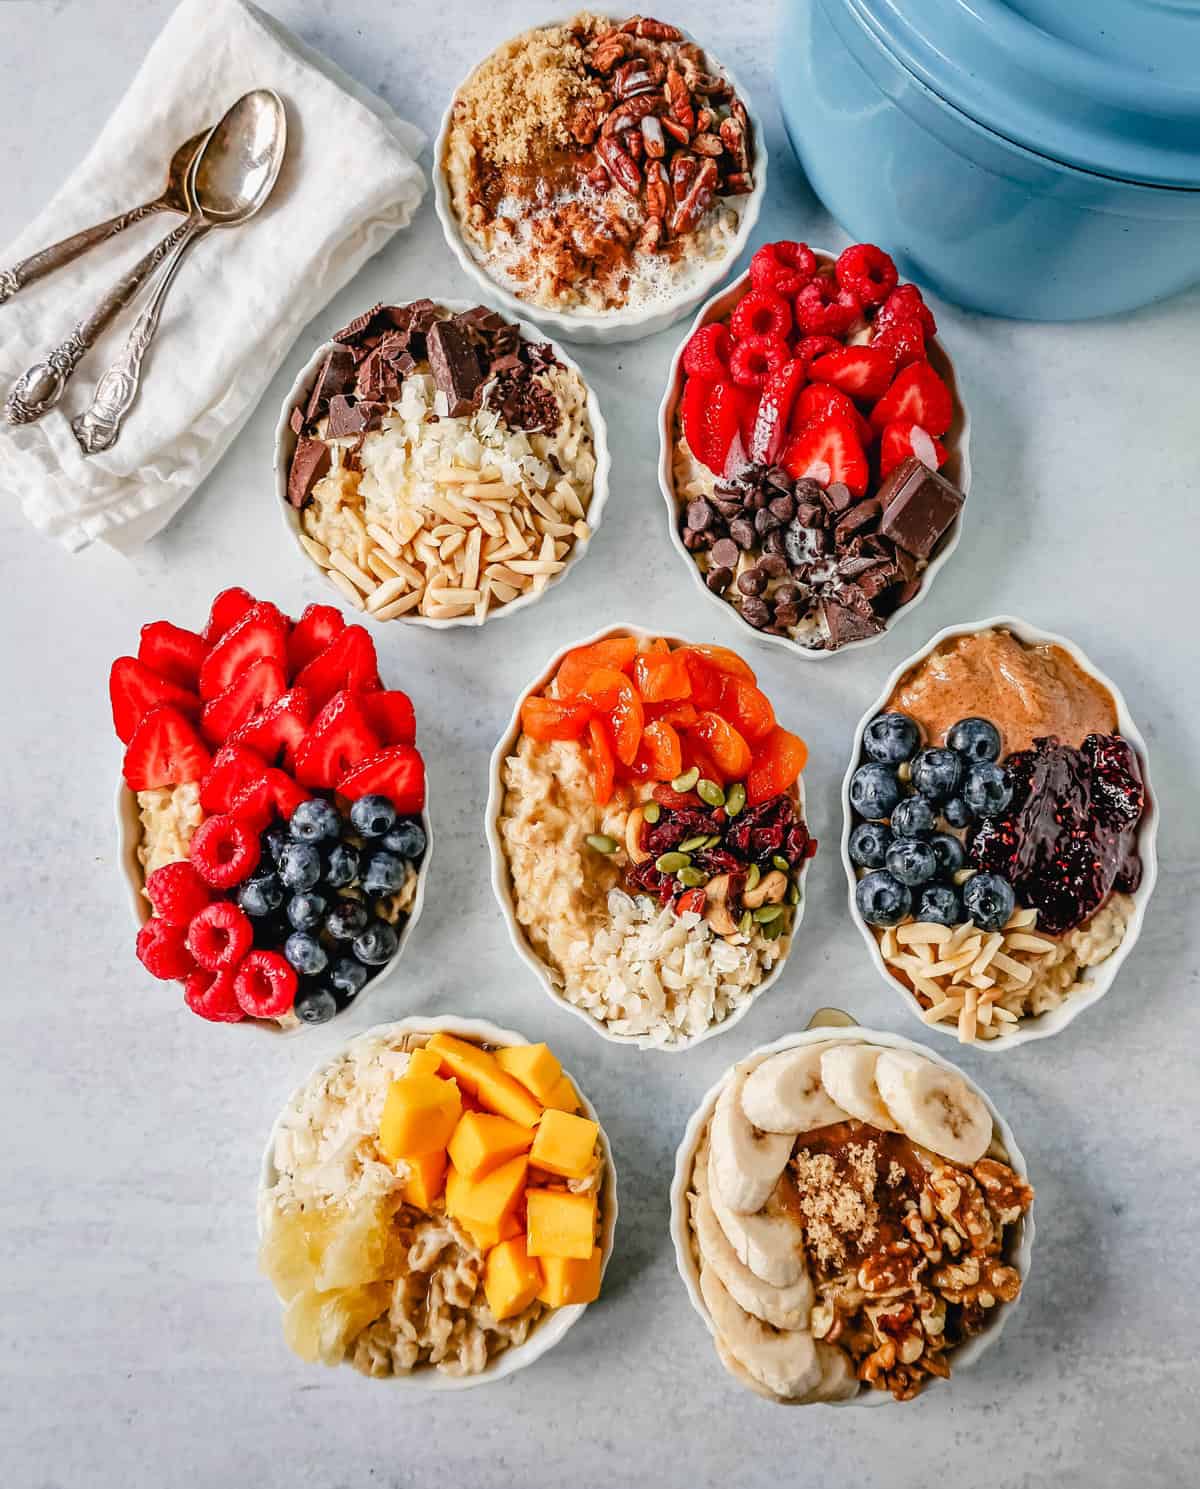 Best Oatmeal Storage Containers in 2022 - Simply Oatmeal